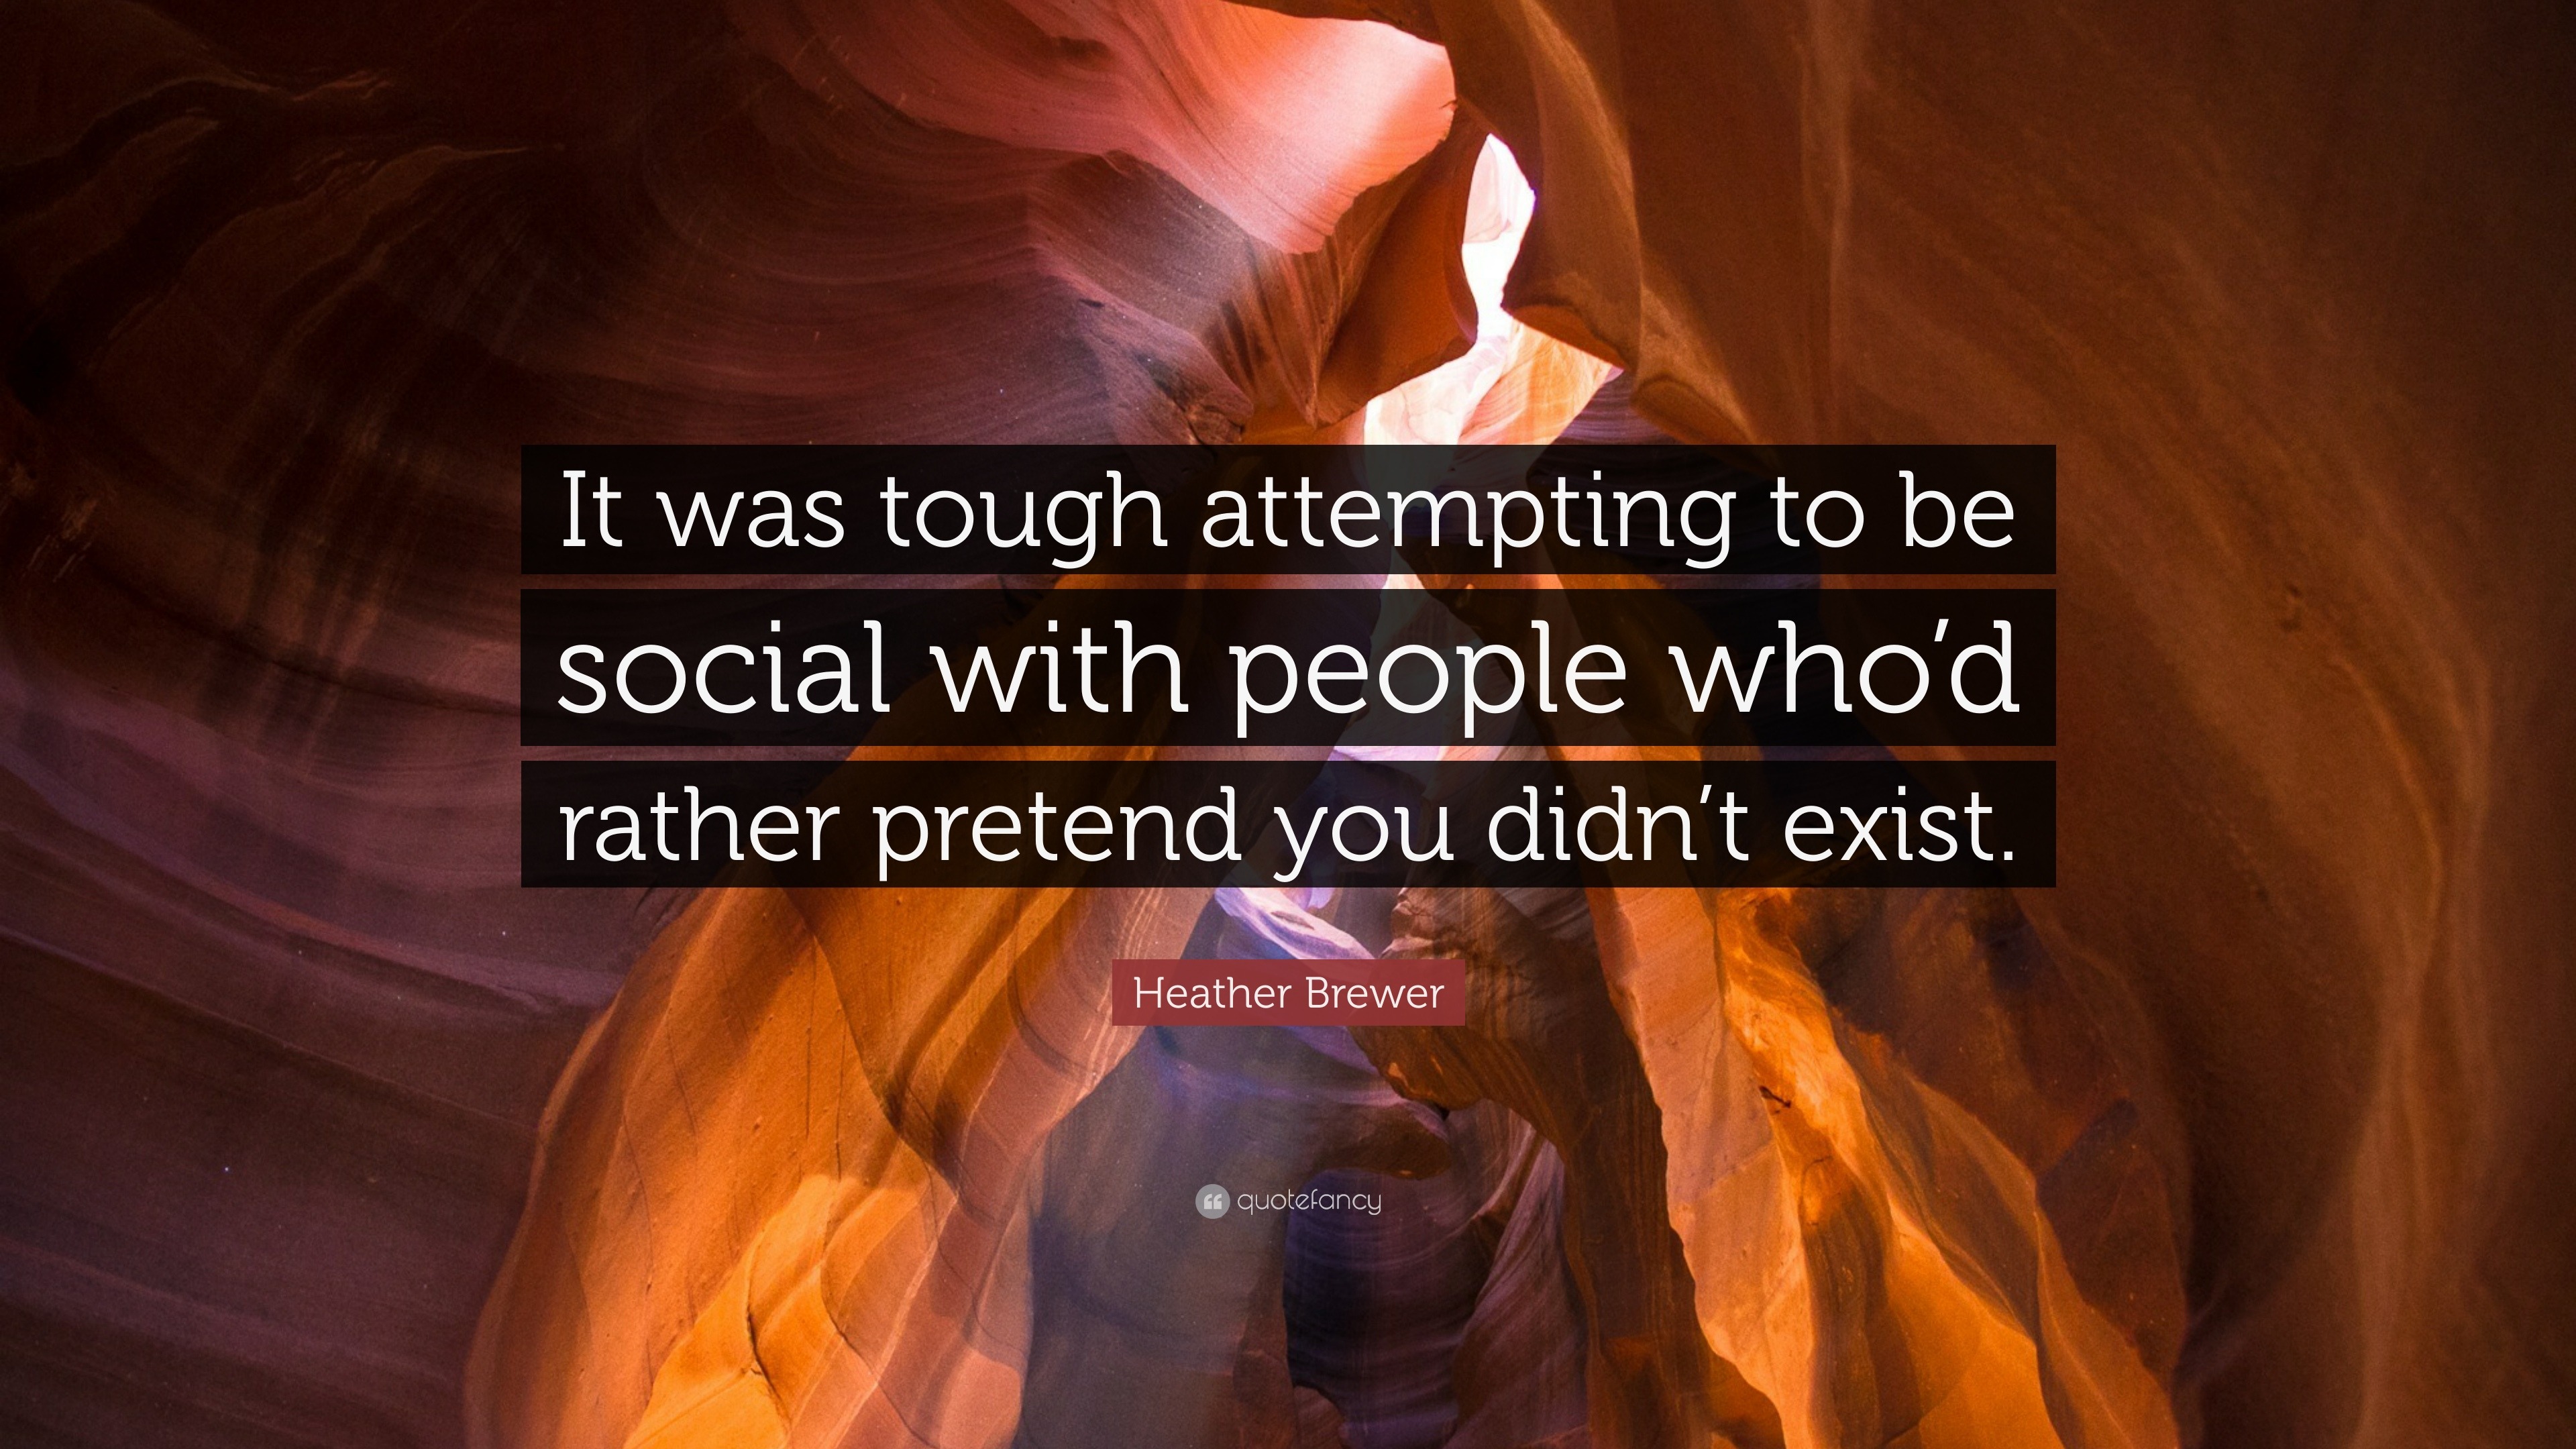 Heather Brewer Quote: “It was tough attempting to be social with people  who'd rather pretend